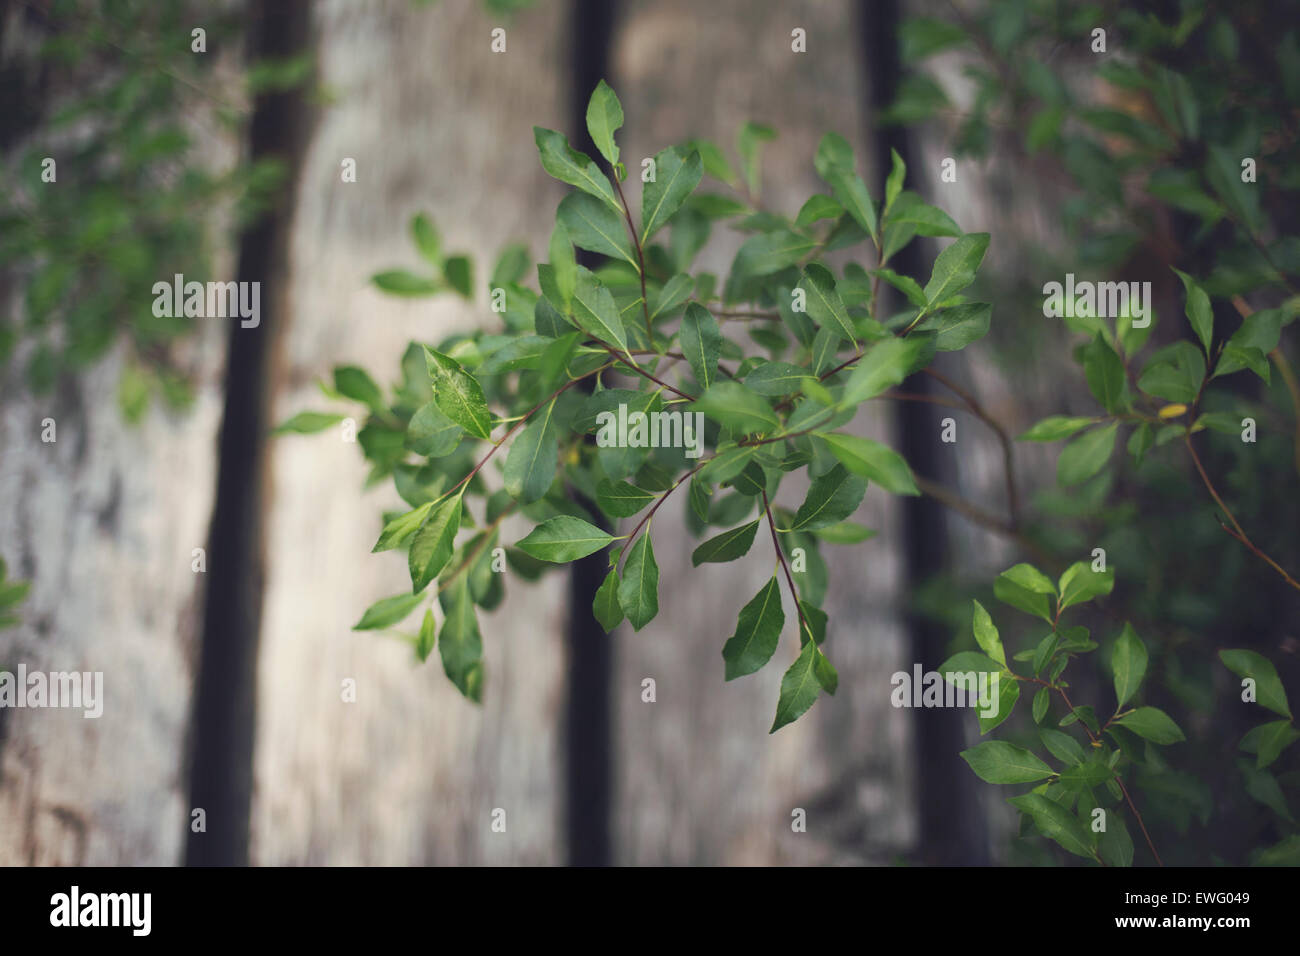 Small Green Tree Leaves by Fence Stock Photo